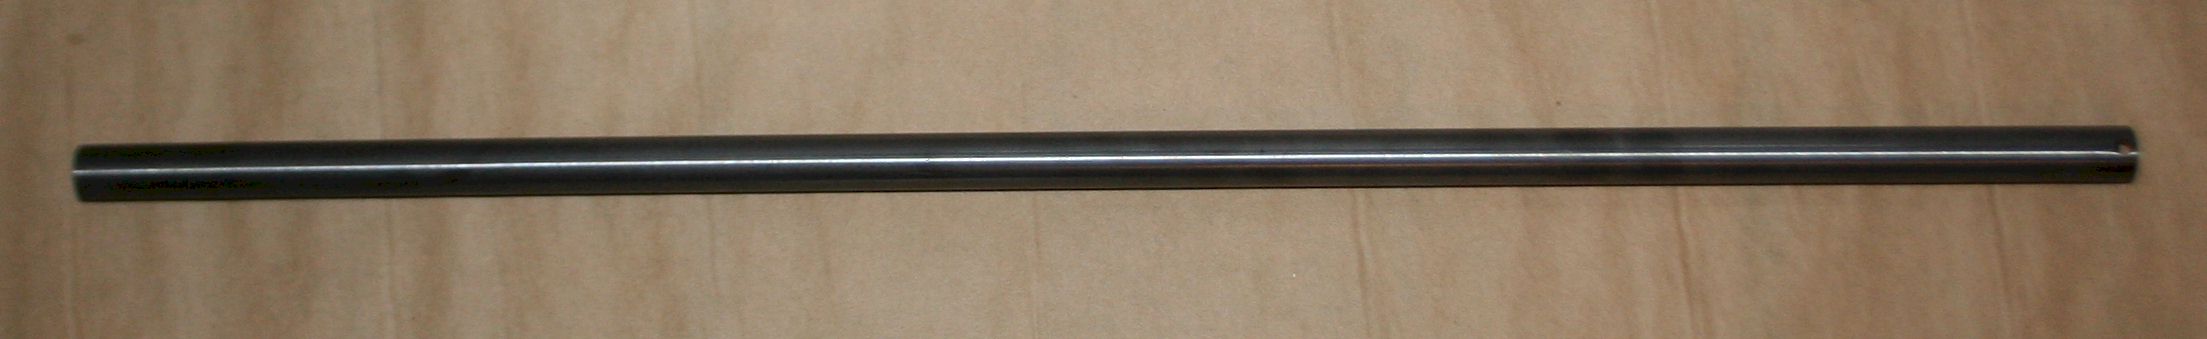 Magazine tube - LARGE calibers Winchester lever action 1866, 1873, 1892, 1894 Uberti and Marlin - Click Image to Close